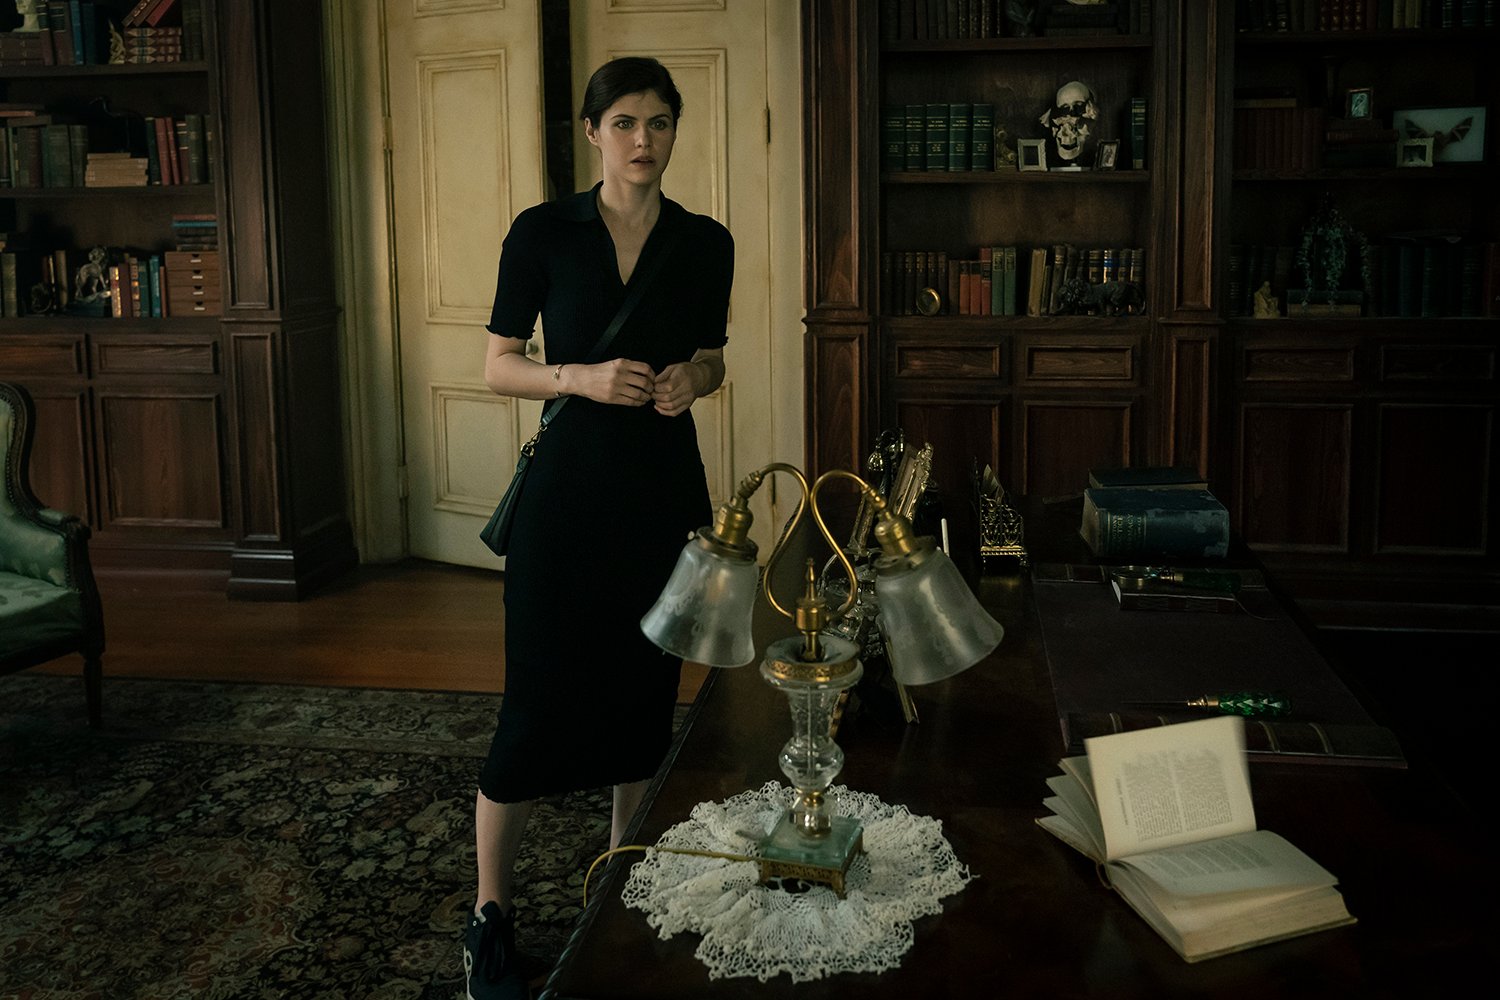 Mayfair Witches star Alexandra Daddario as Rowan Fielding standing by a desk in a library while wearing a black dress.